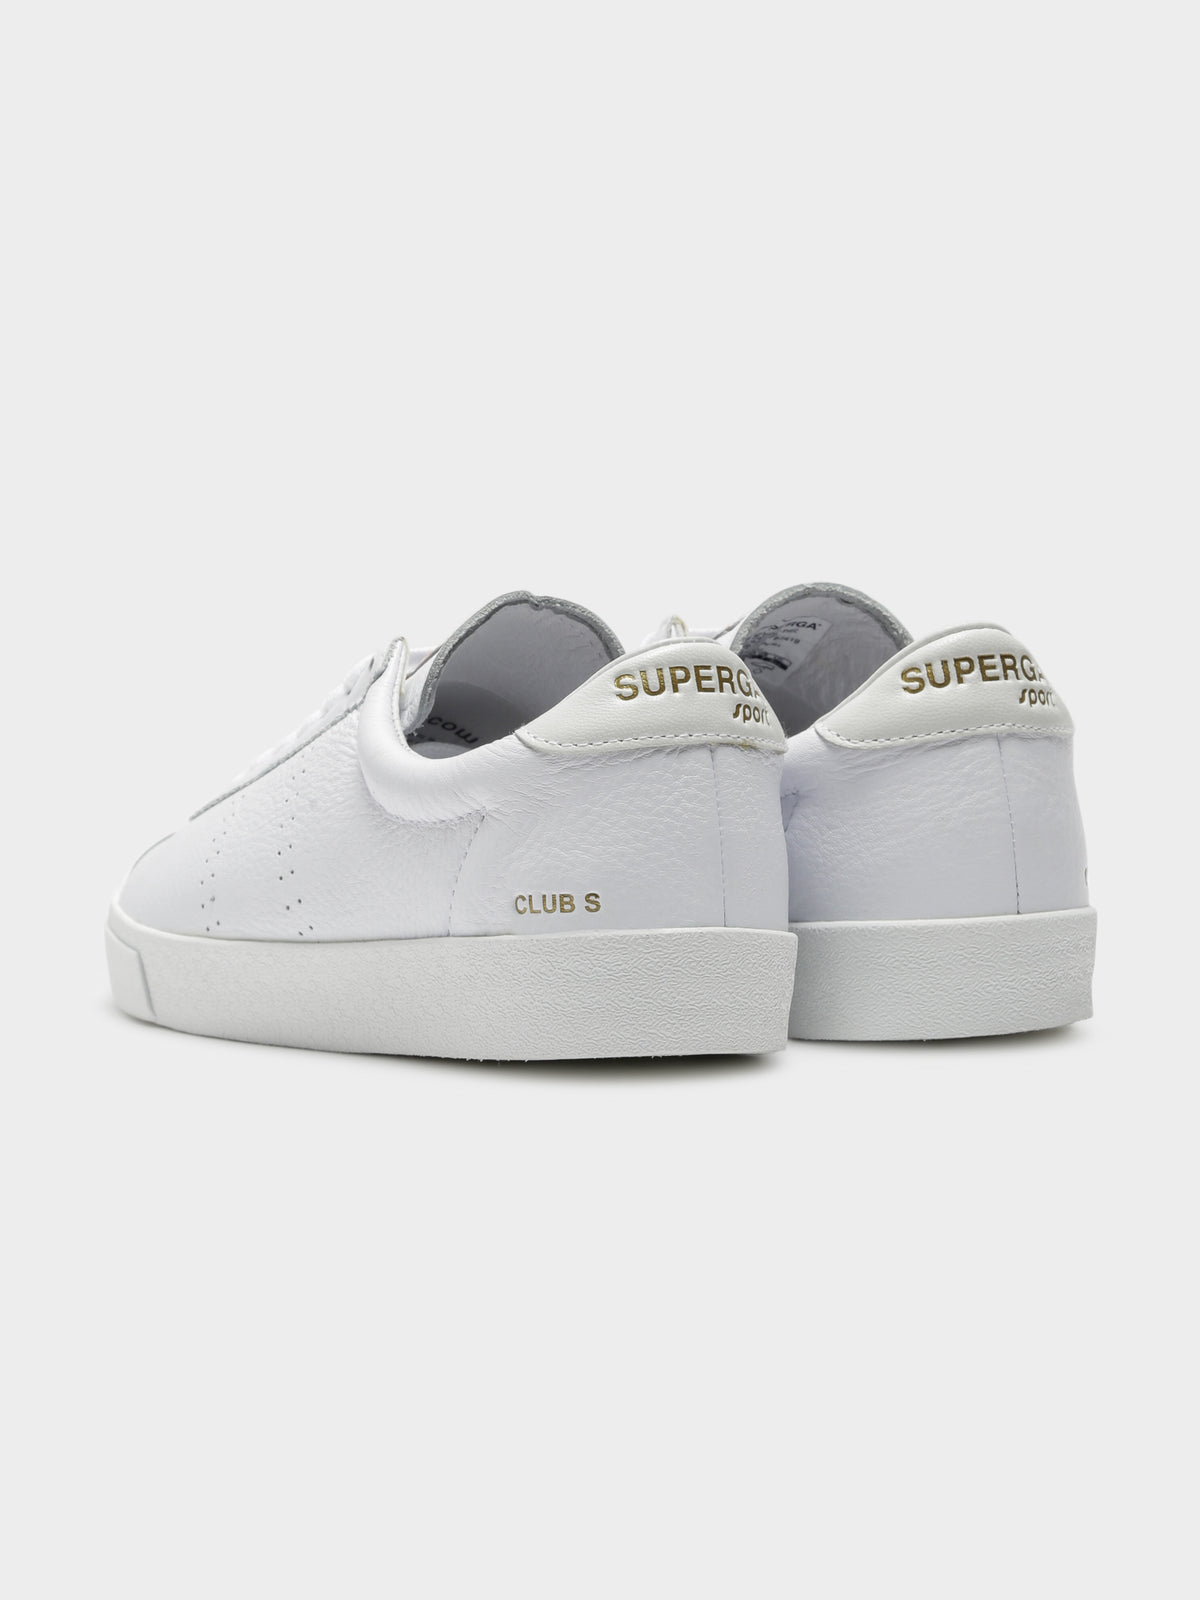 Mens 2869 Club S Comfleau UK Sneakers in White